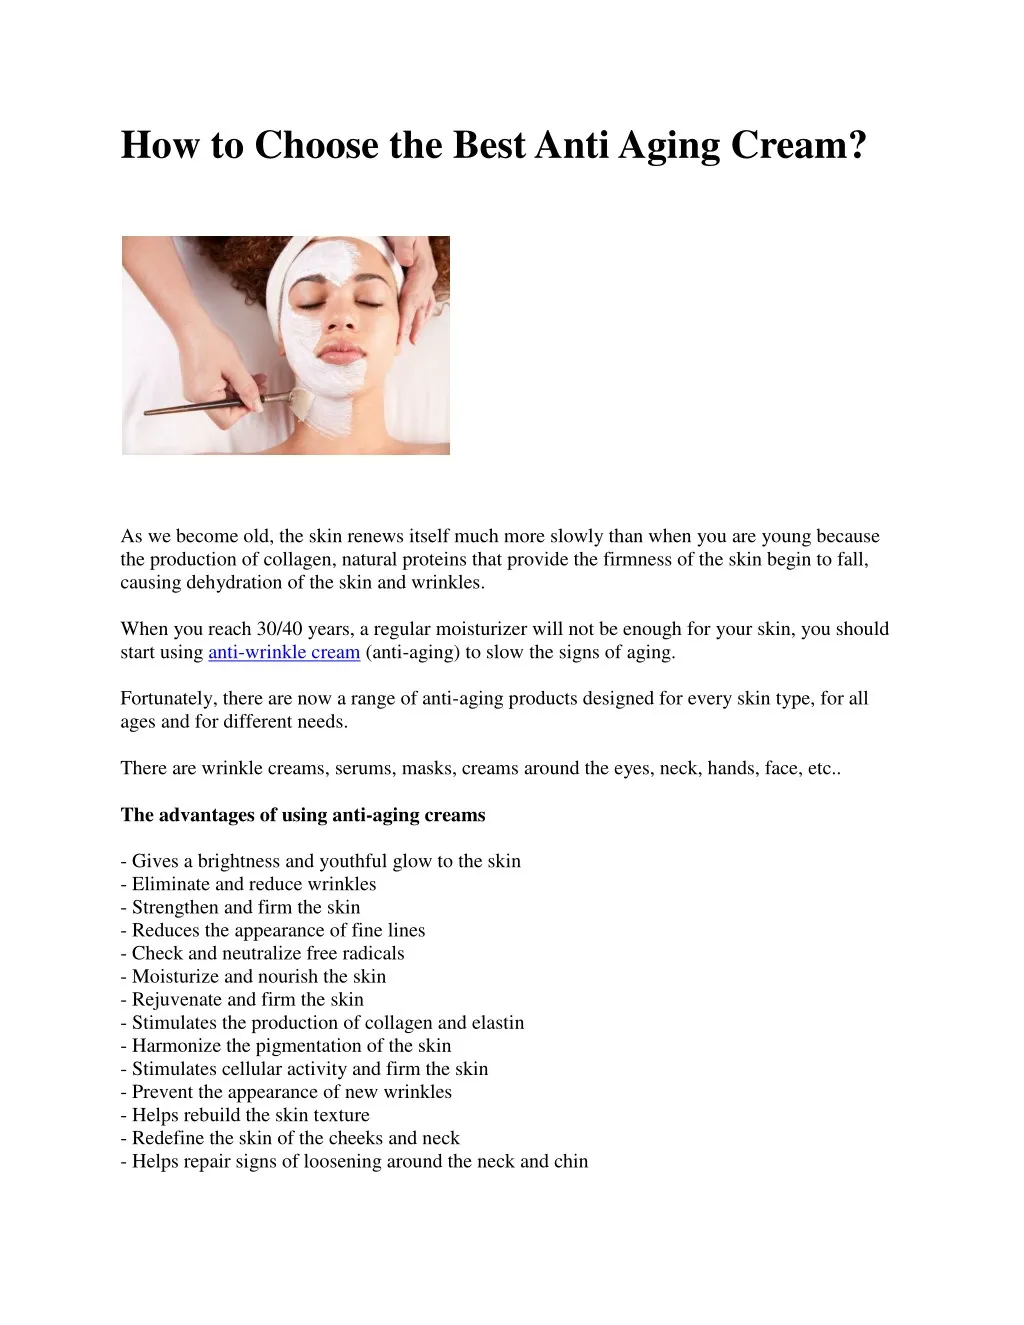 how to choose the best anti aging cream